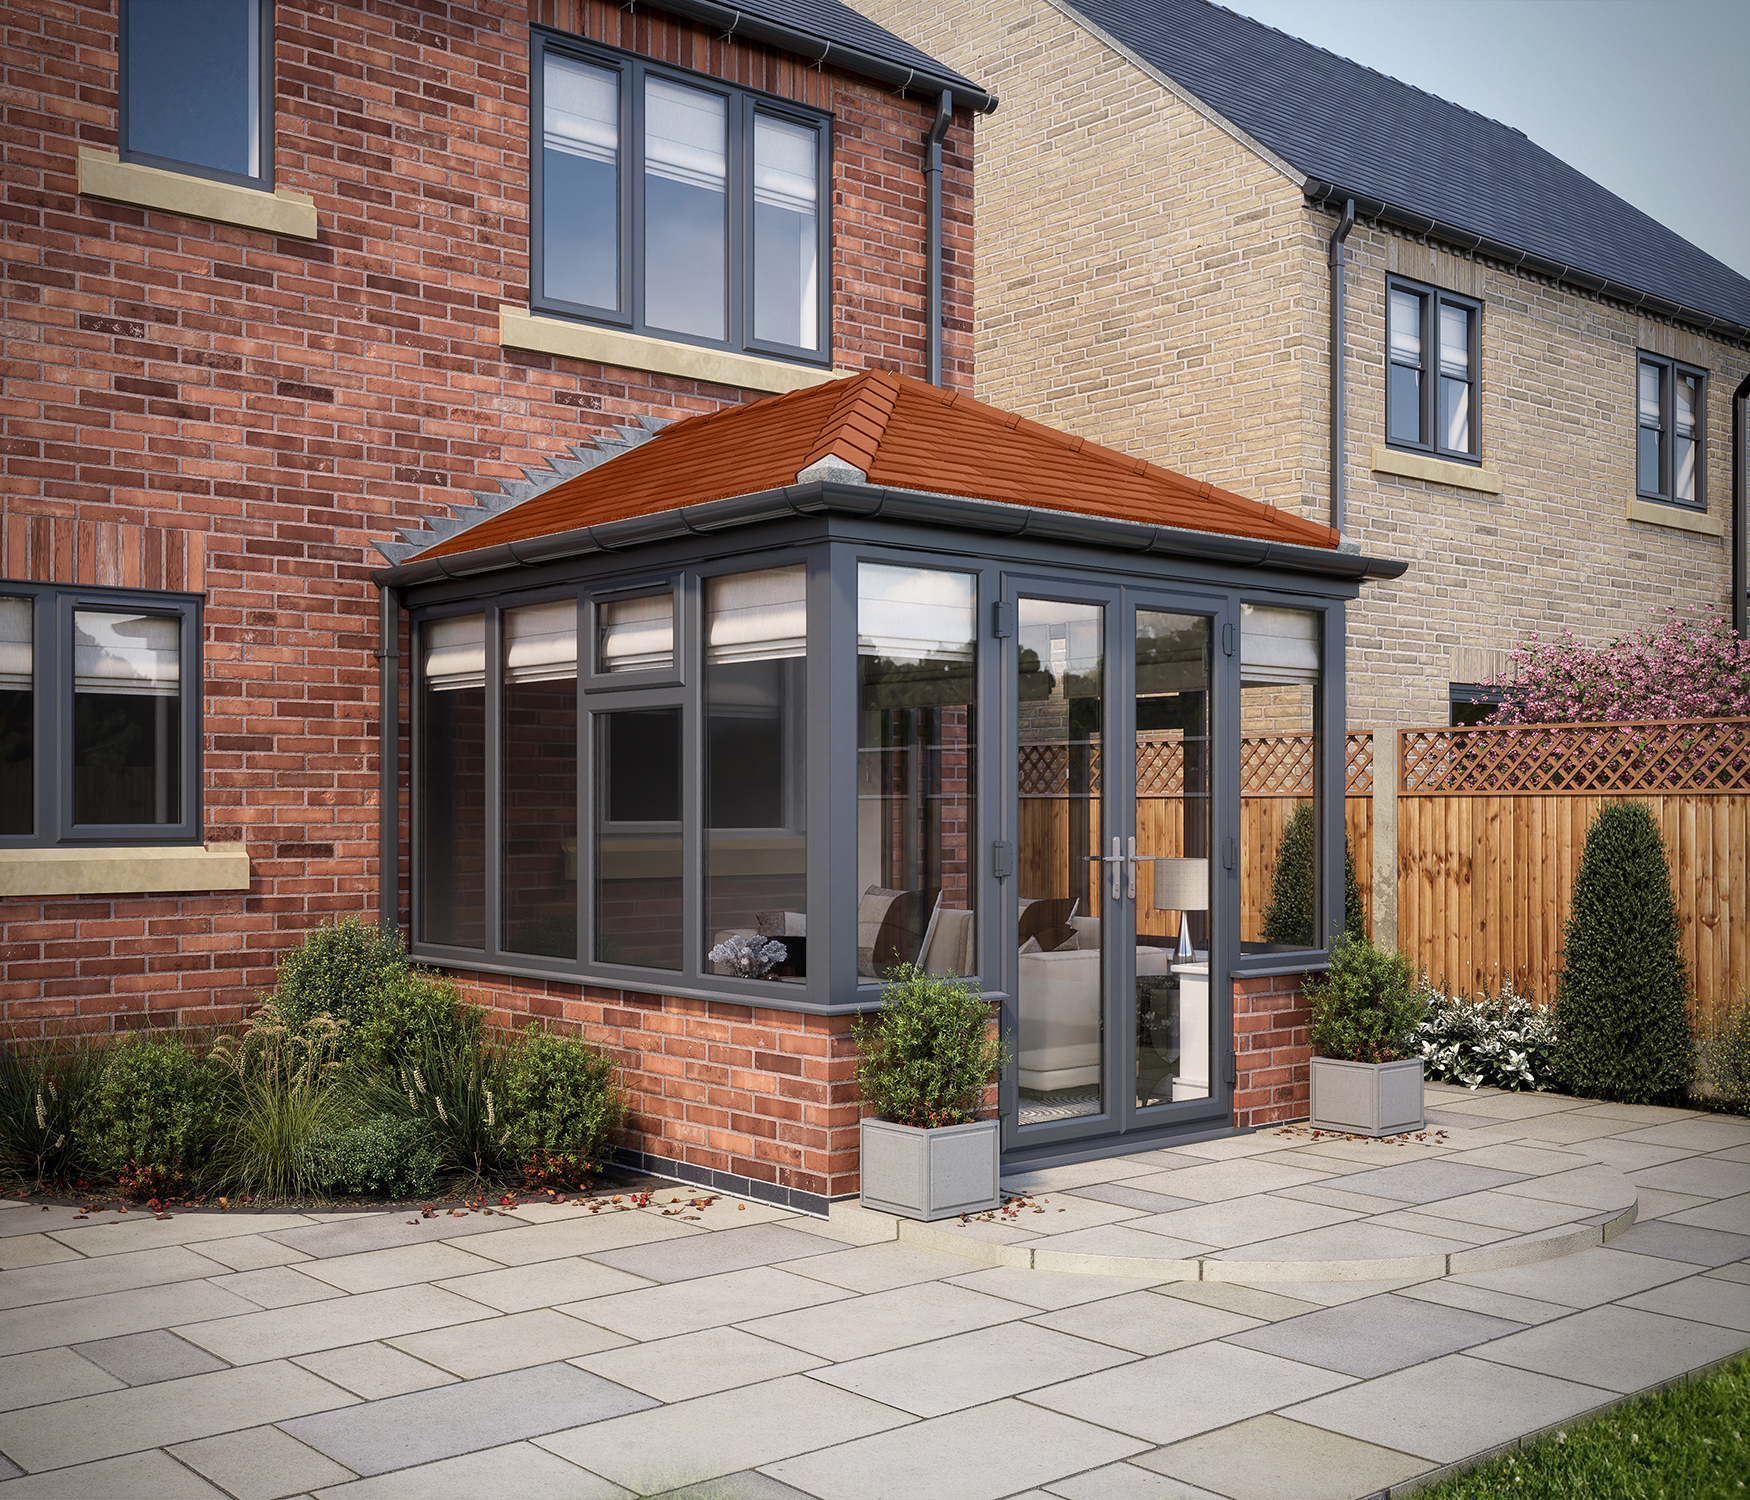 Image of SOLid Roof Edwardian Conservatory Grey Frames Dwarf Wall with Rustic Terracotta Tiles - 13 x 13ft